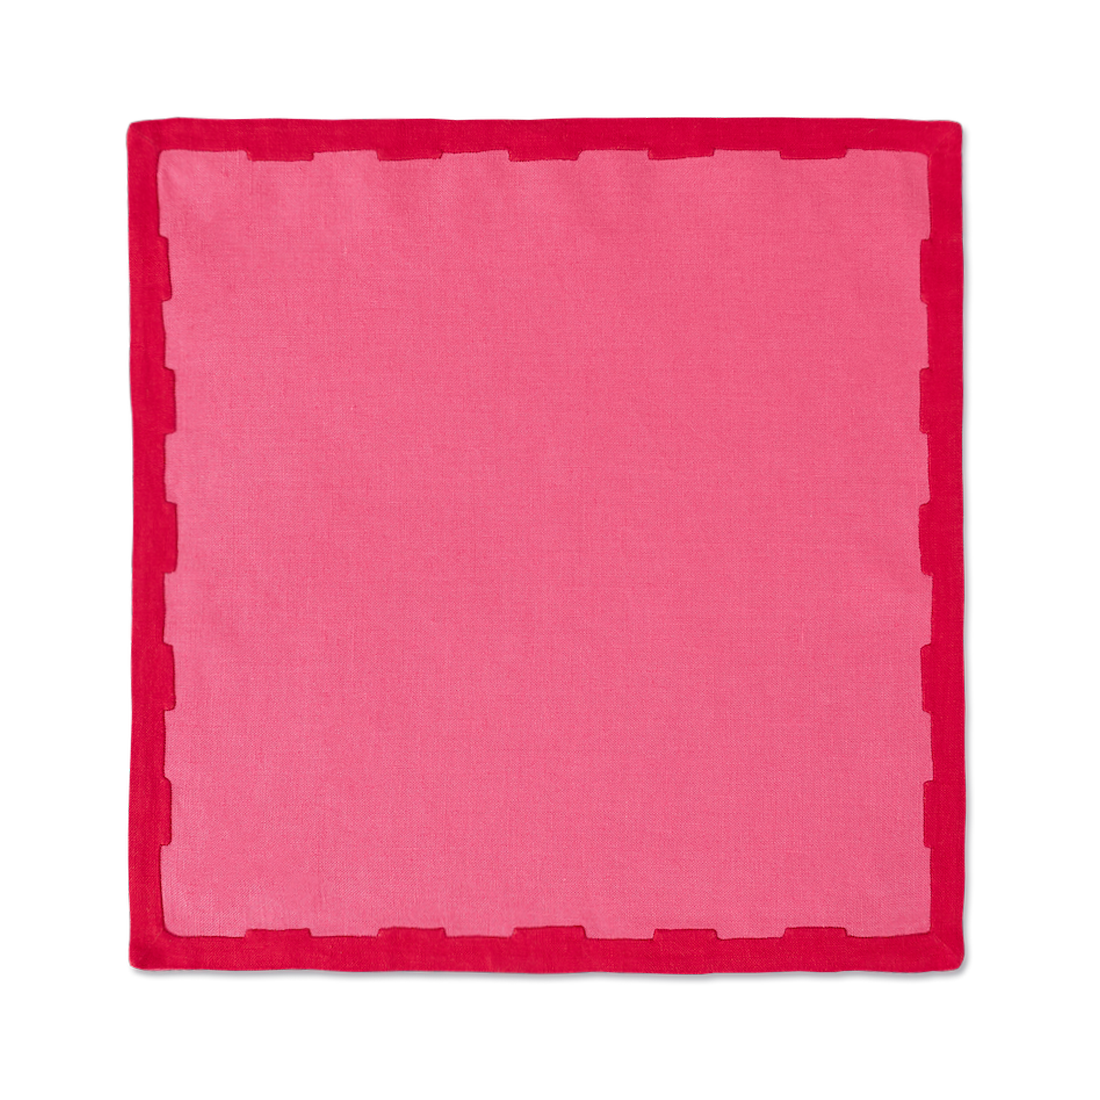 Hanover Placemats, Pink and Red, Set of 2